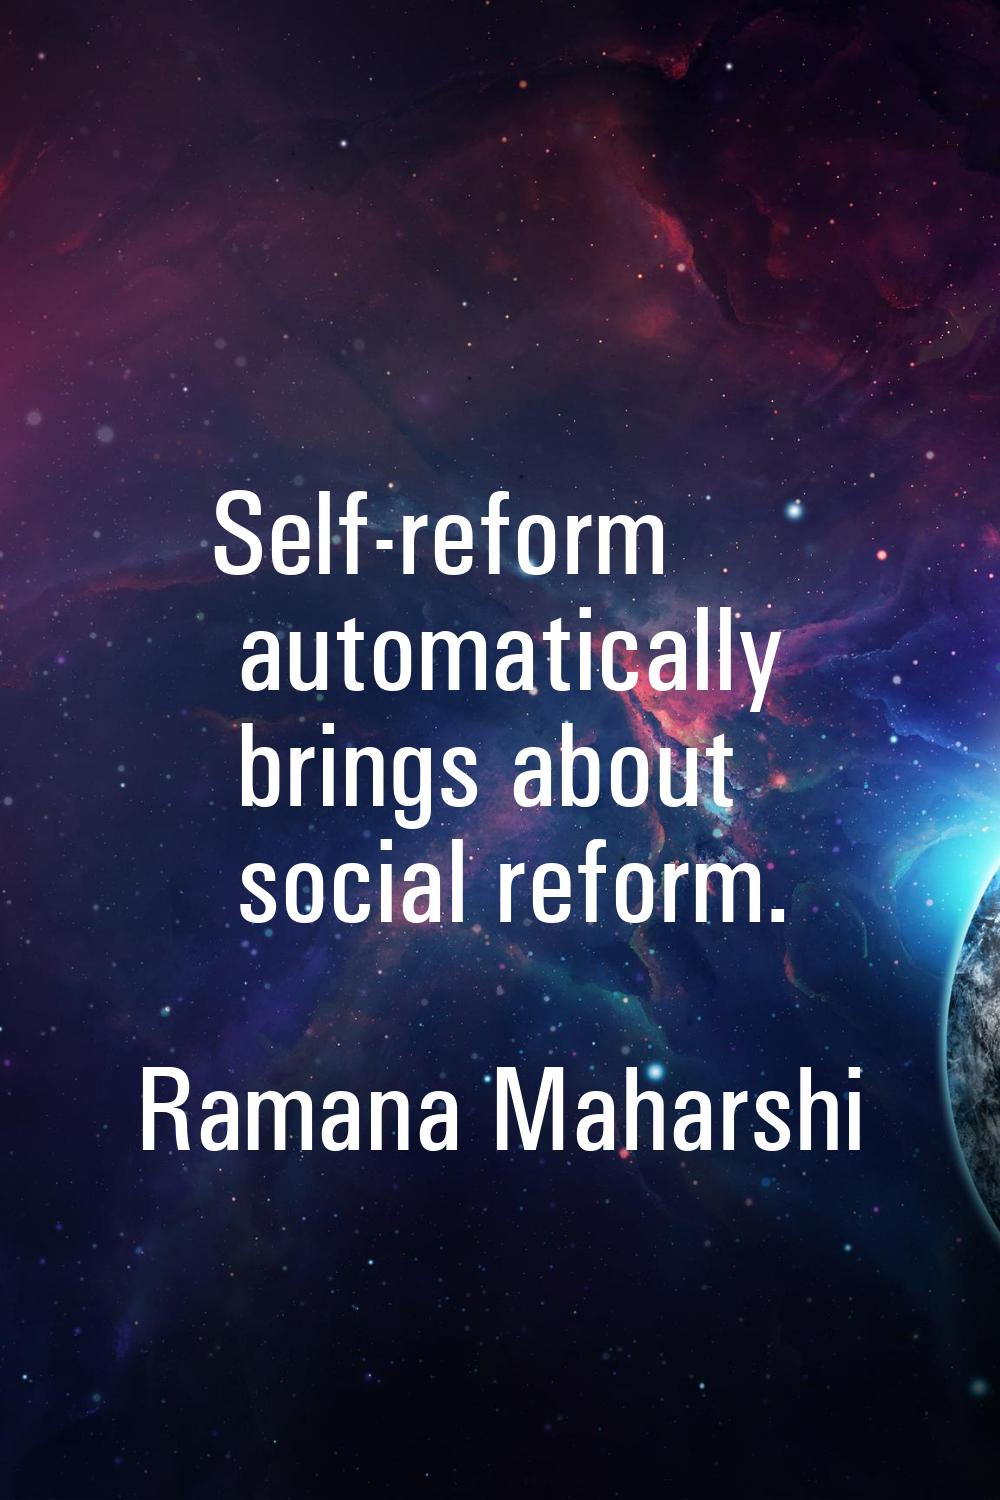 Self-reform automatically brings about social reform.